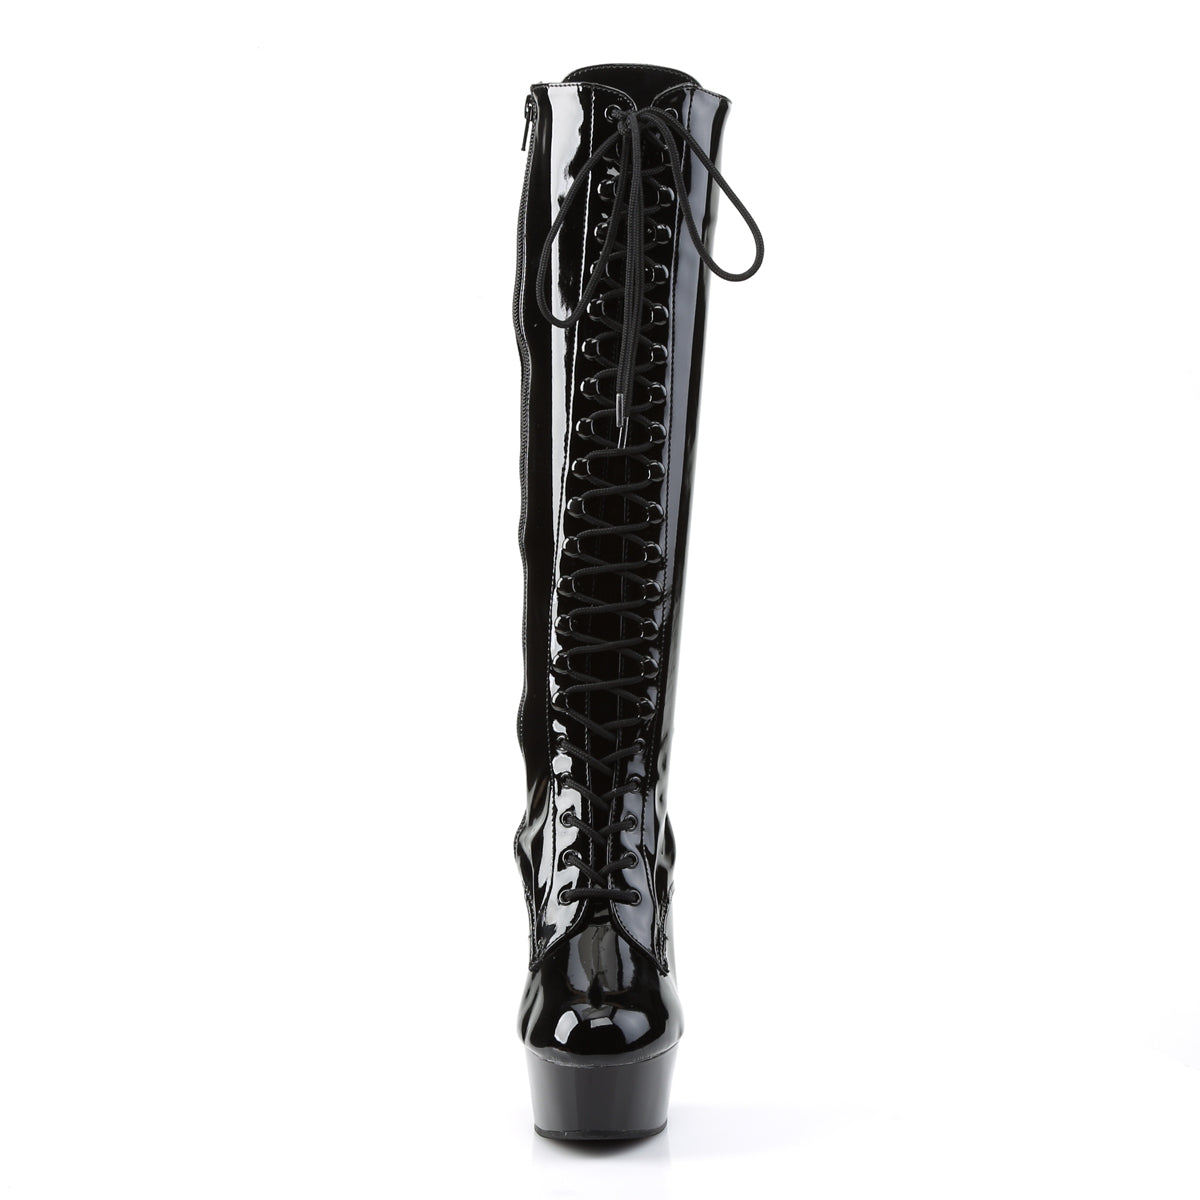 DELIGHT-2023 / B / M 6 "PLEASER FAST DELIVERY 24-48h 